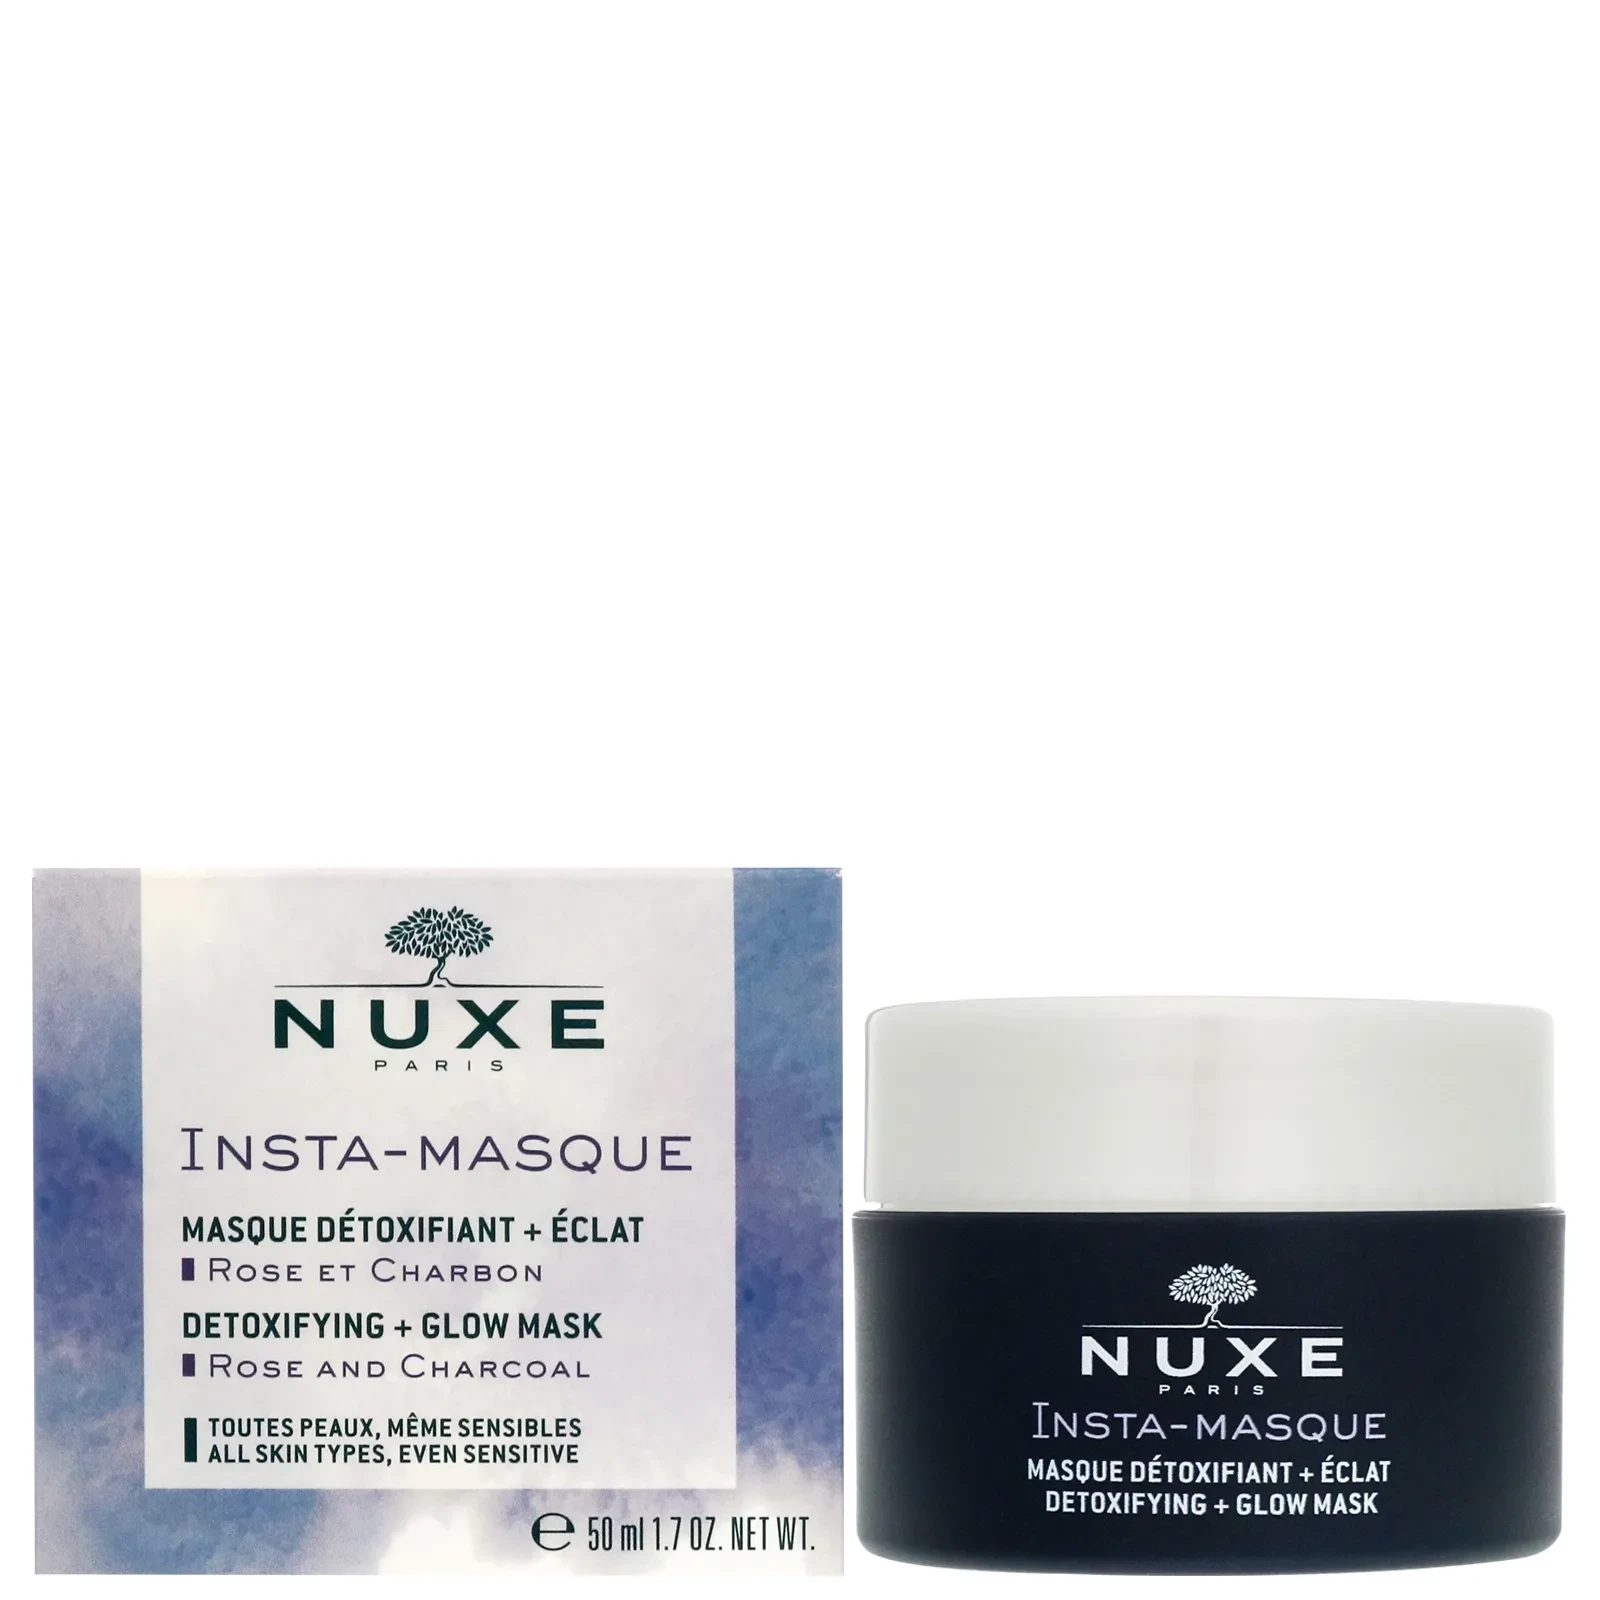 NUXE - Insta-Masque Detoxifying + Glow Mask - and Charcoal for All Types Even Sensitive